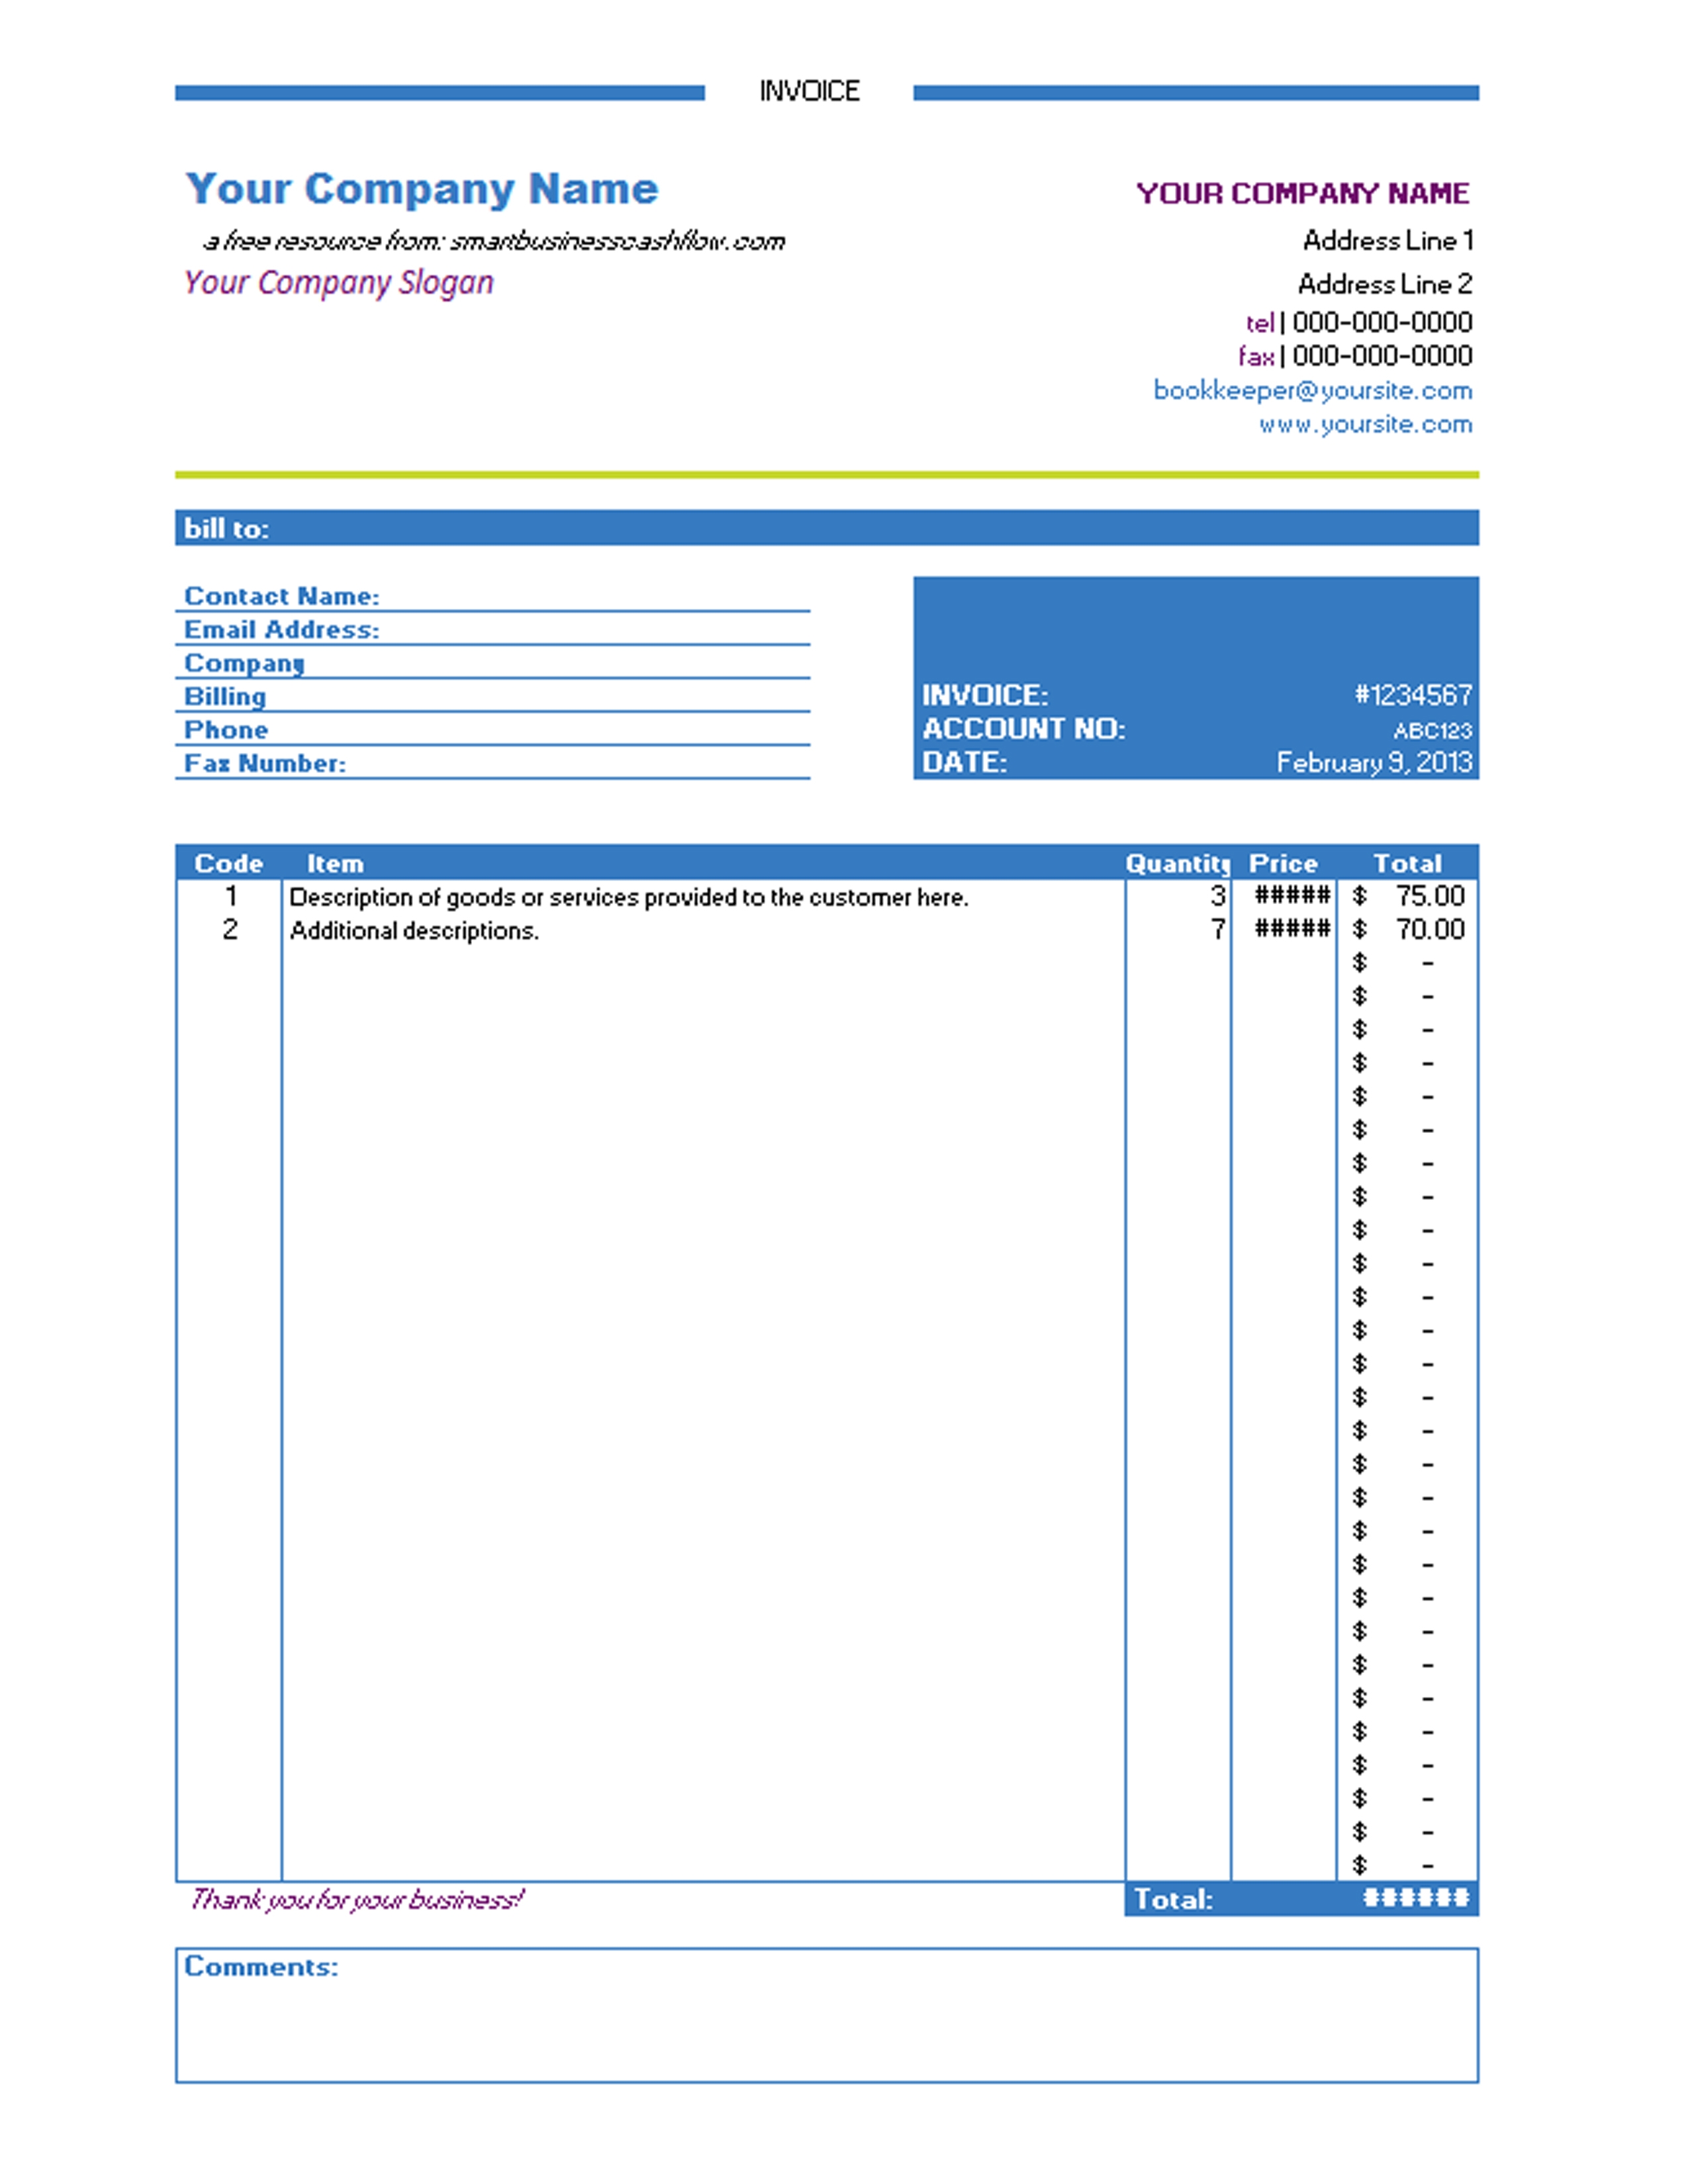 invoice template excel free printable invoice free invoice template download for excel